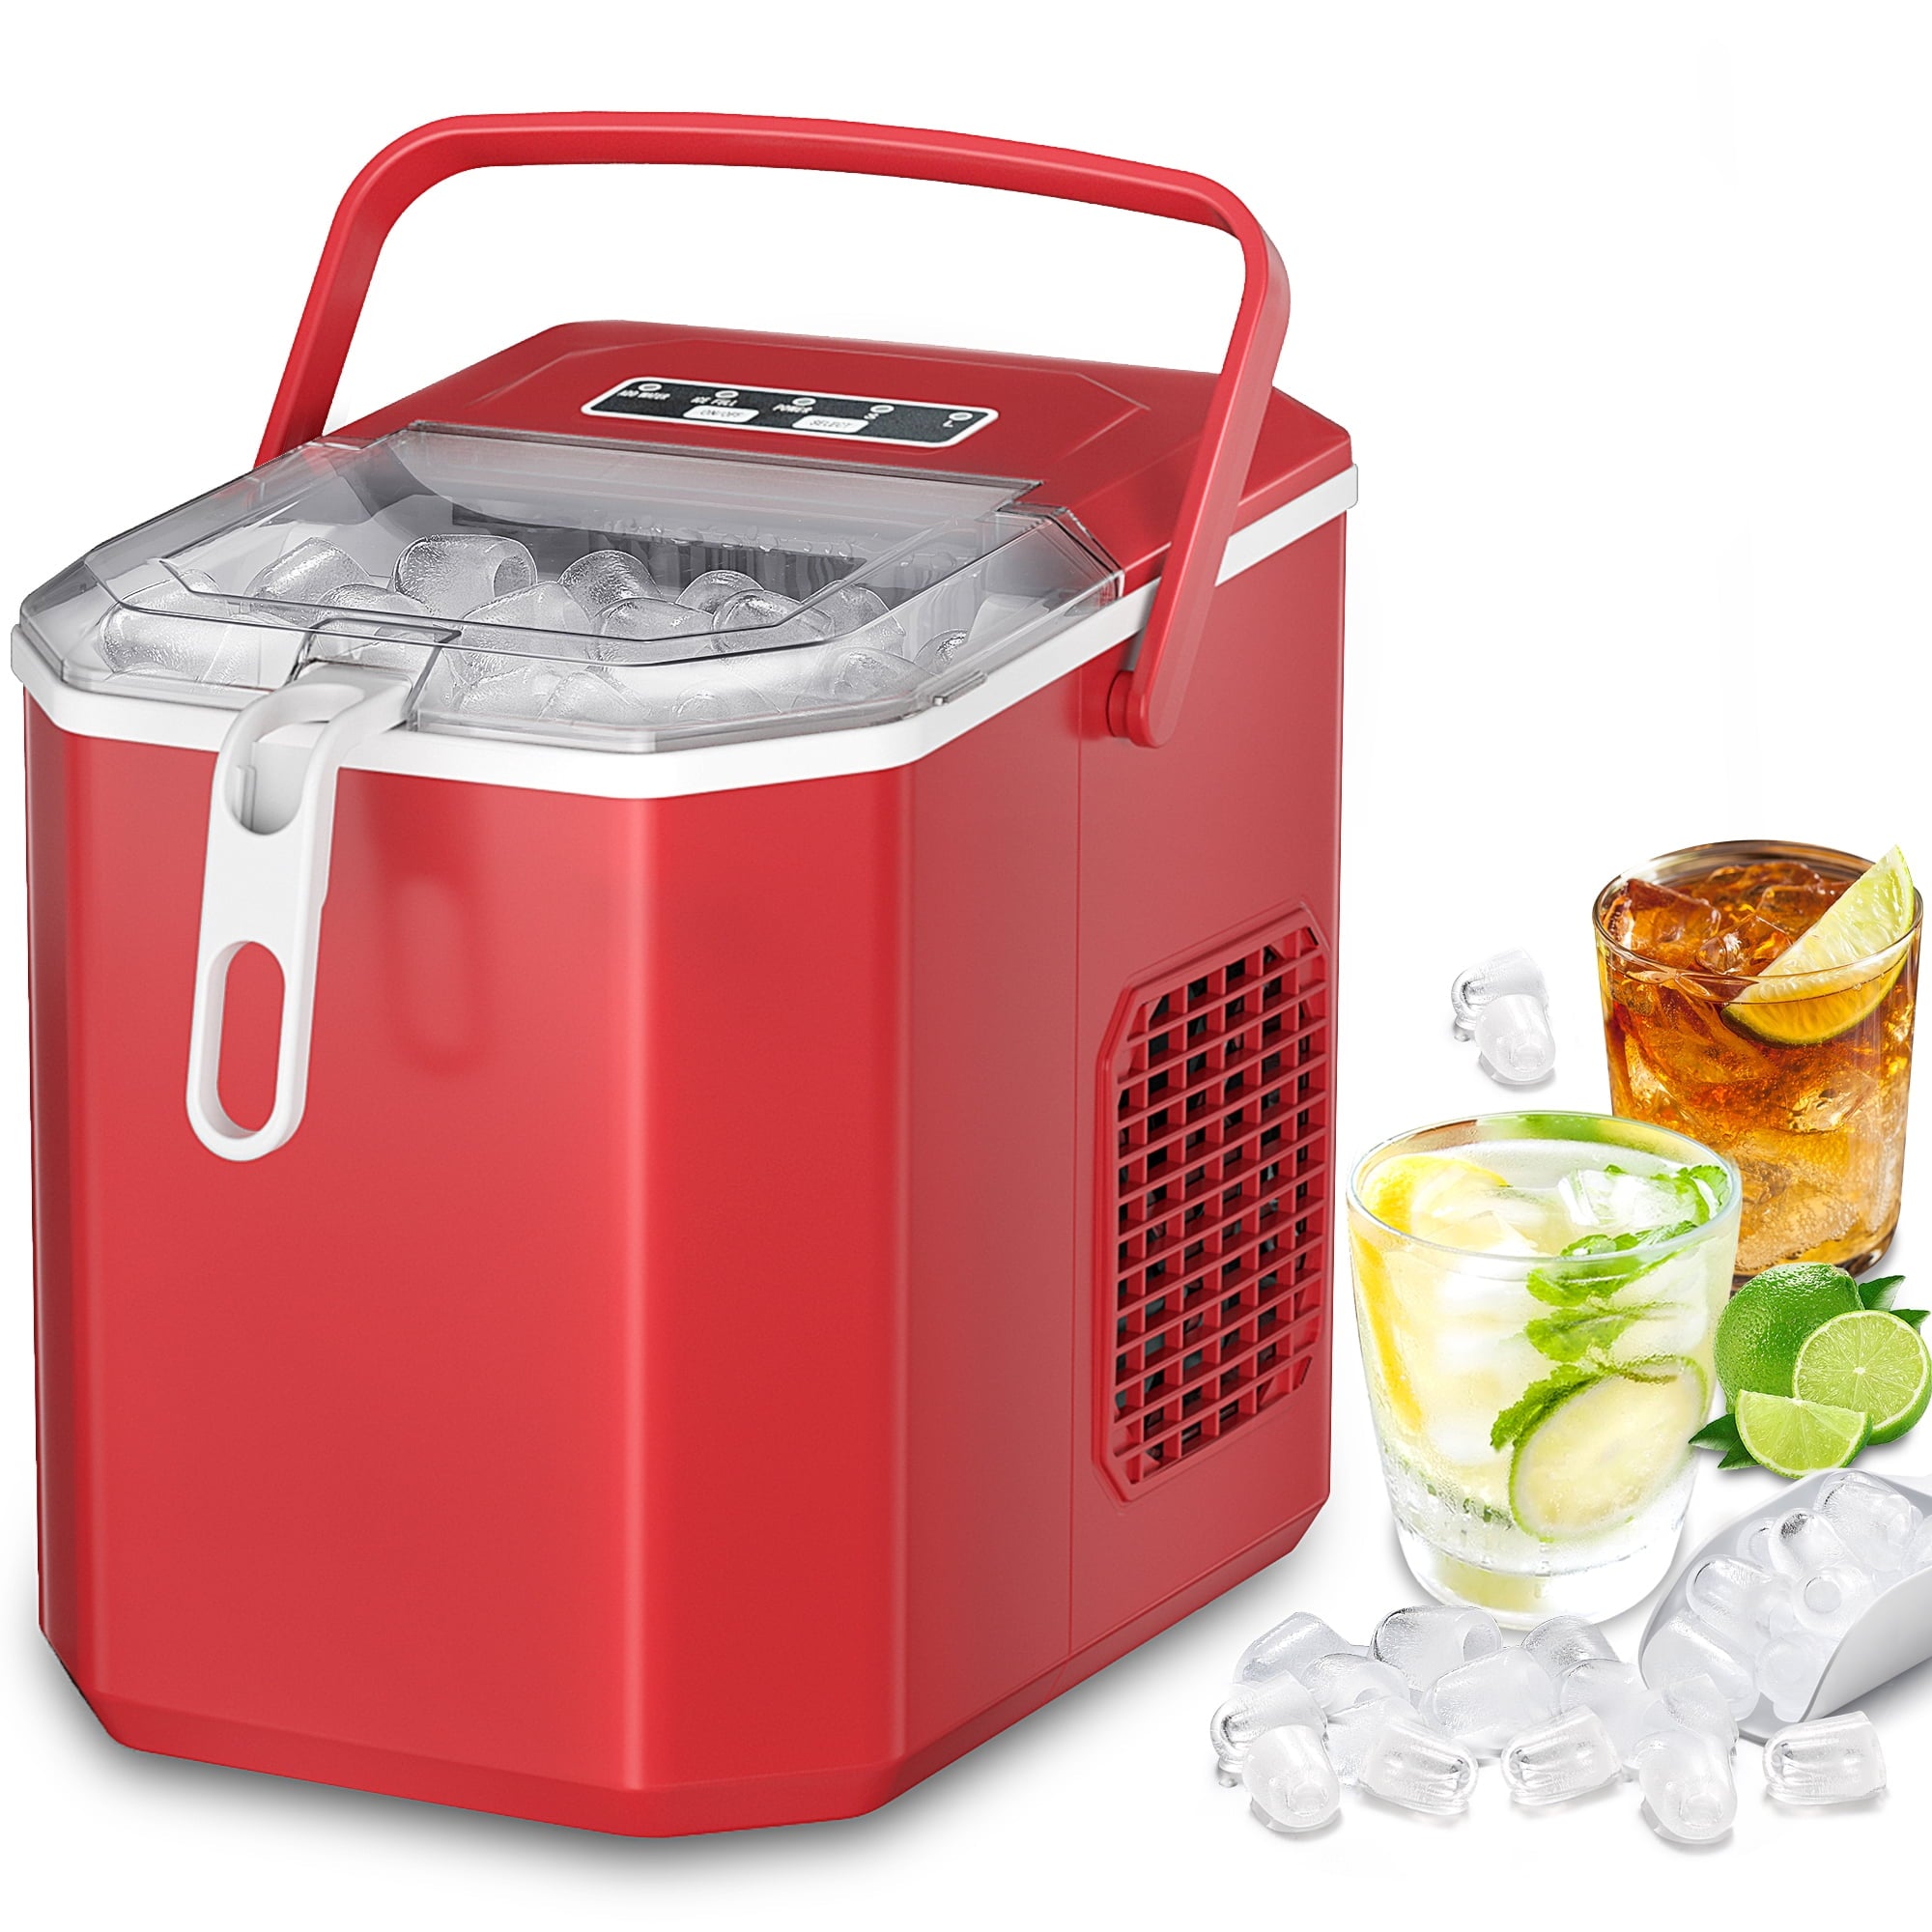 Besttey Countertop Ice Maker,26lbs/Day, 2 Ice Sizes(S/L), Self-Cleaning w/ Ice Scoop and Basket, Handheld Ice Maker, Red